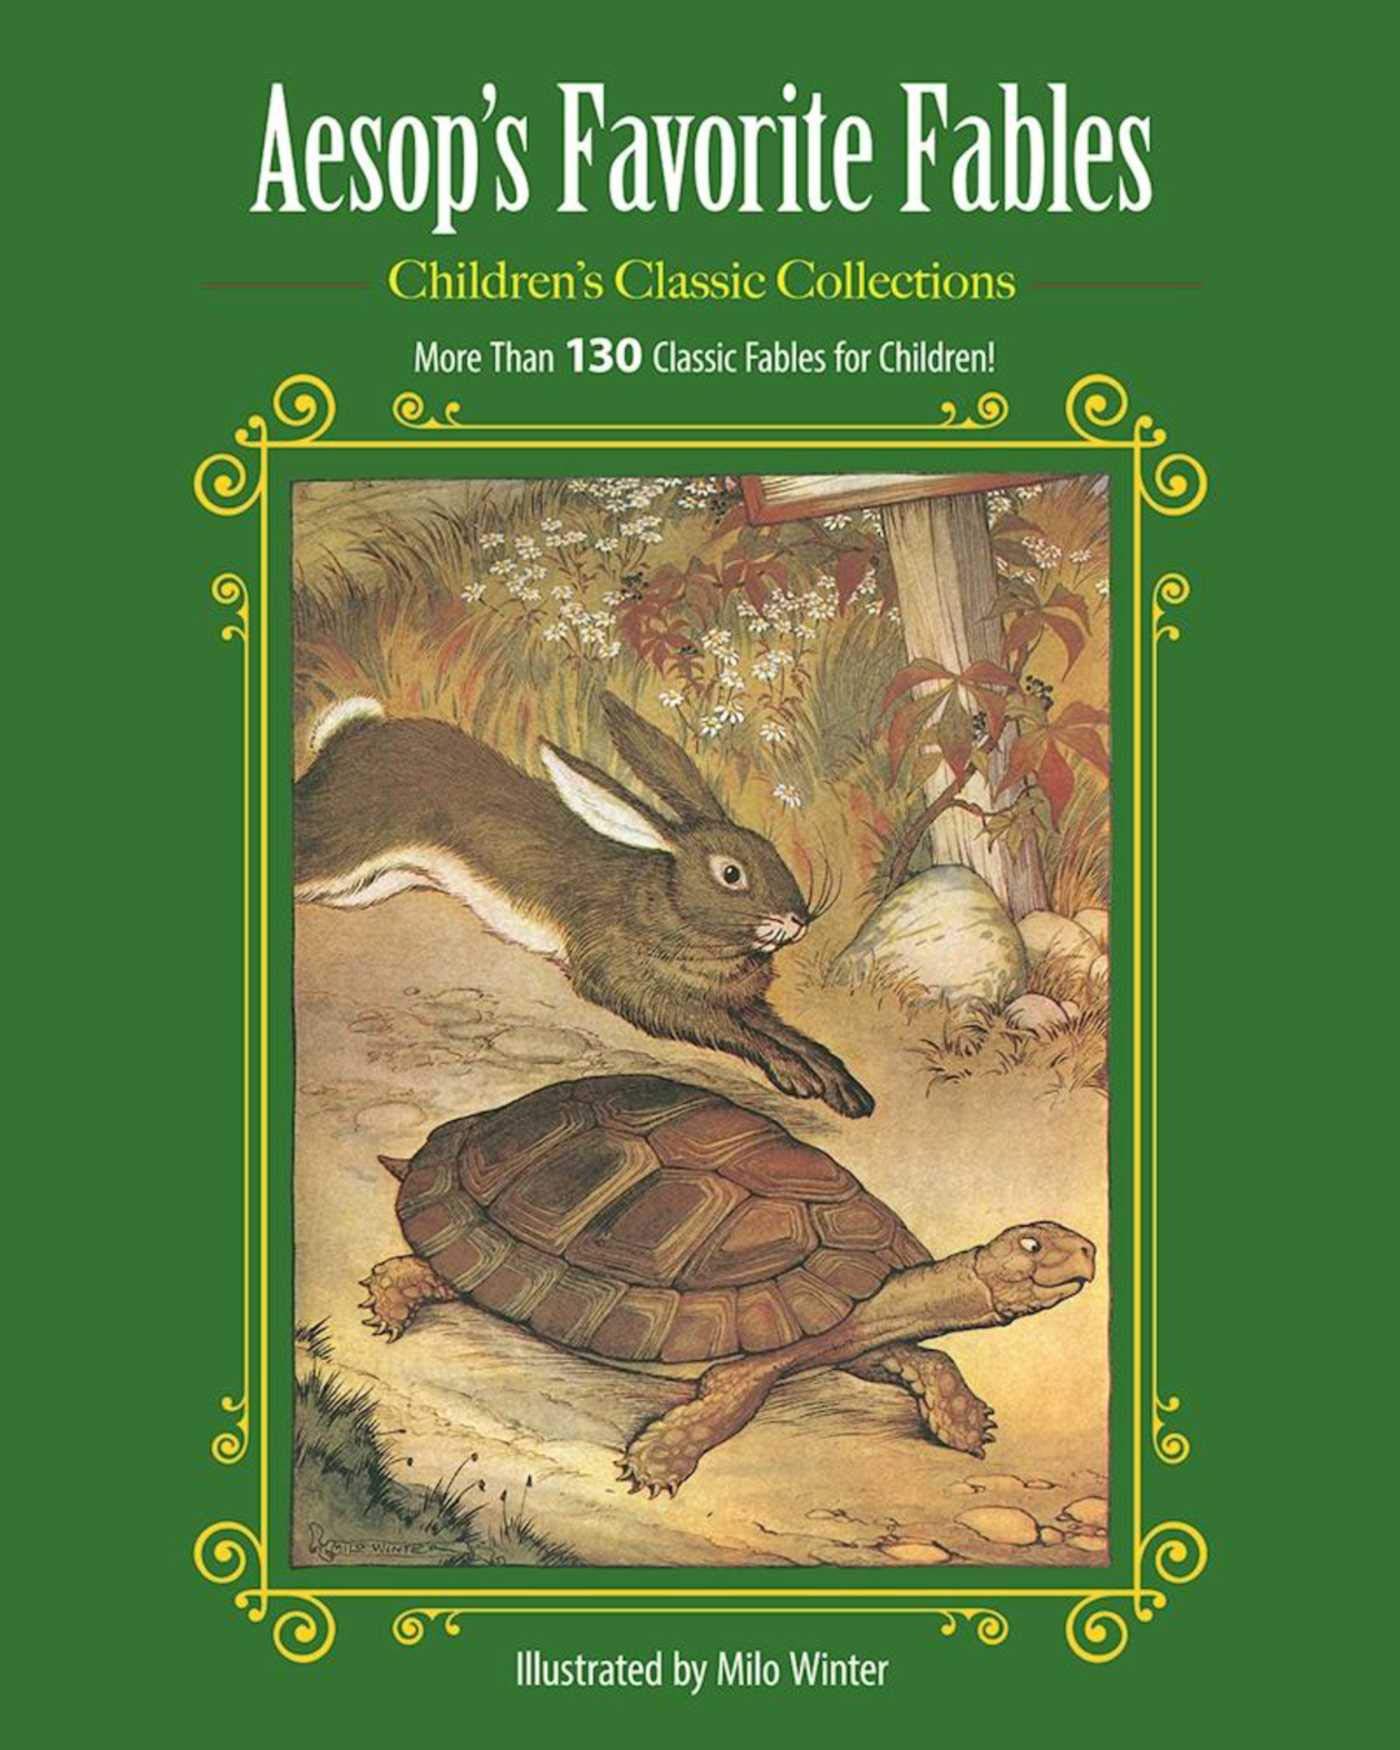 Aesop's Favorite Fables: More Than 130 Classic Fables for Children! (Children's Classic Collections)